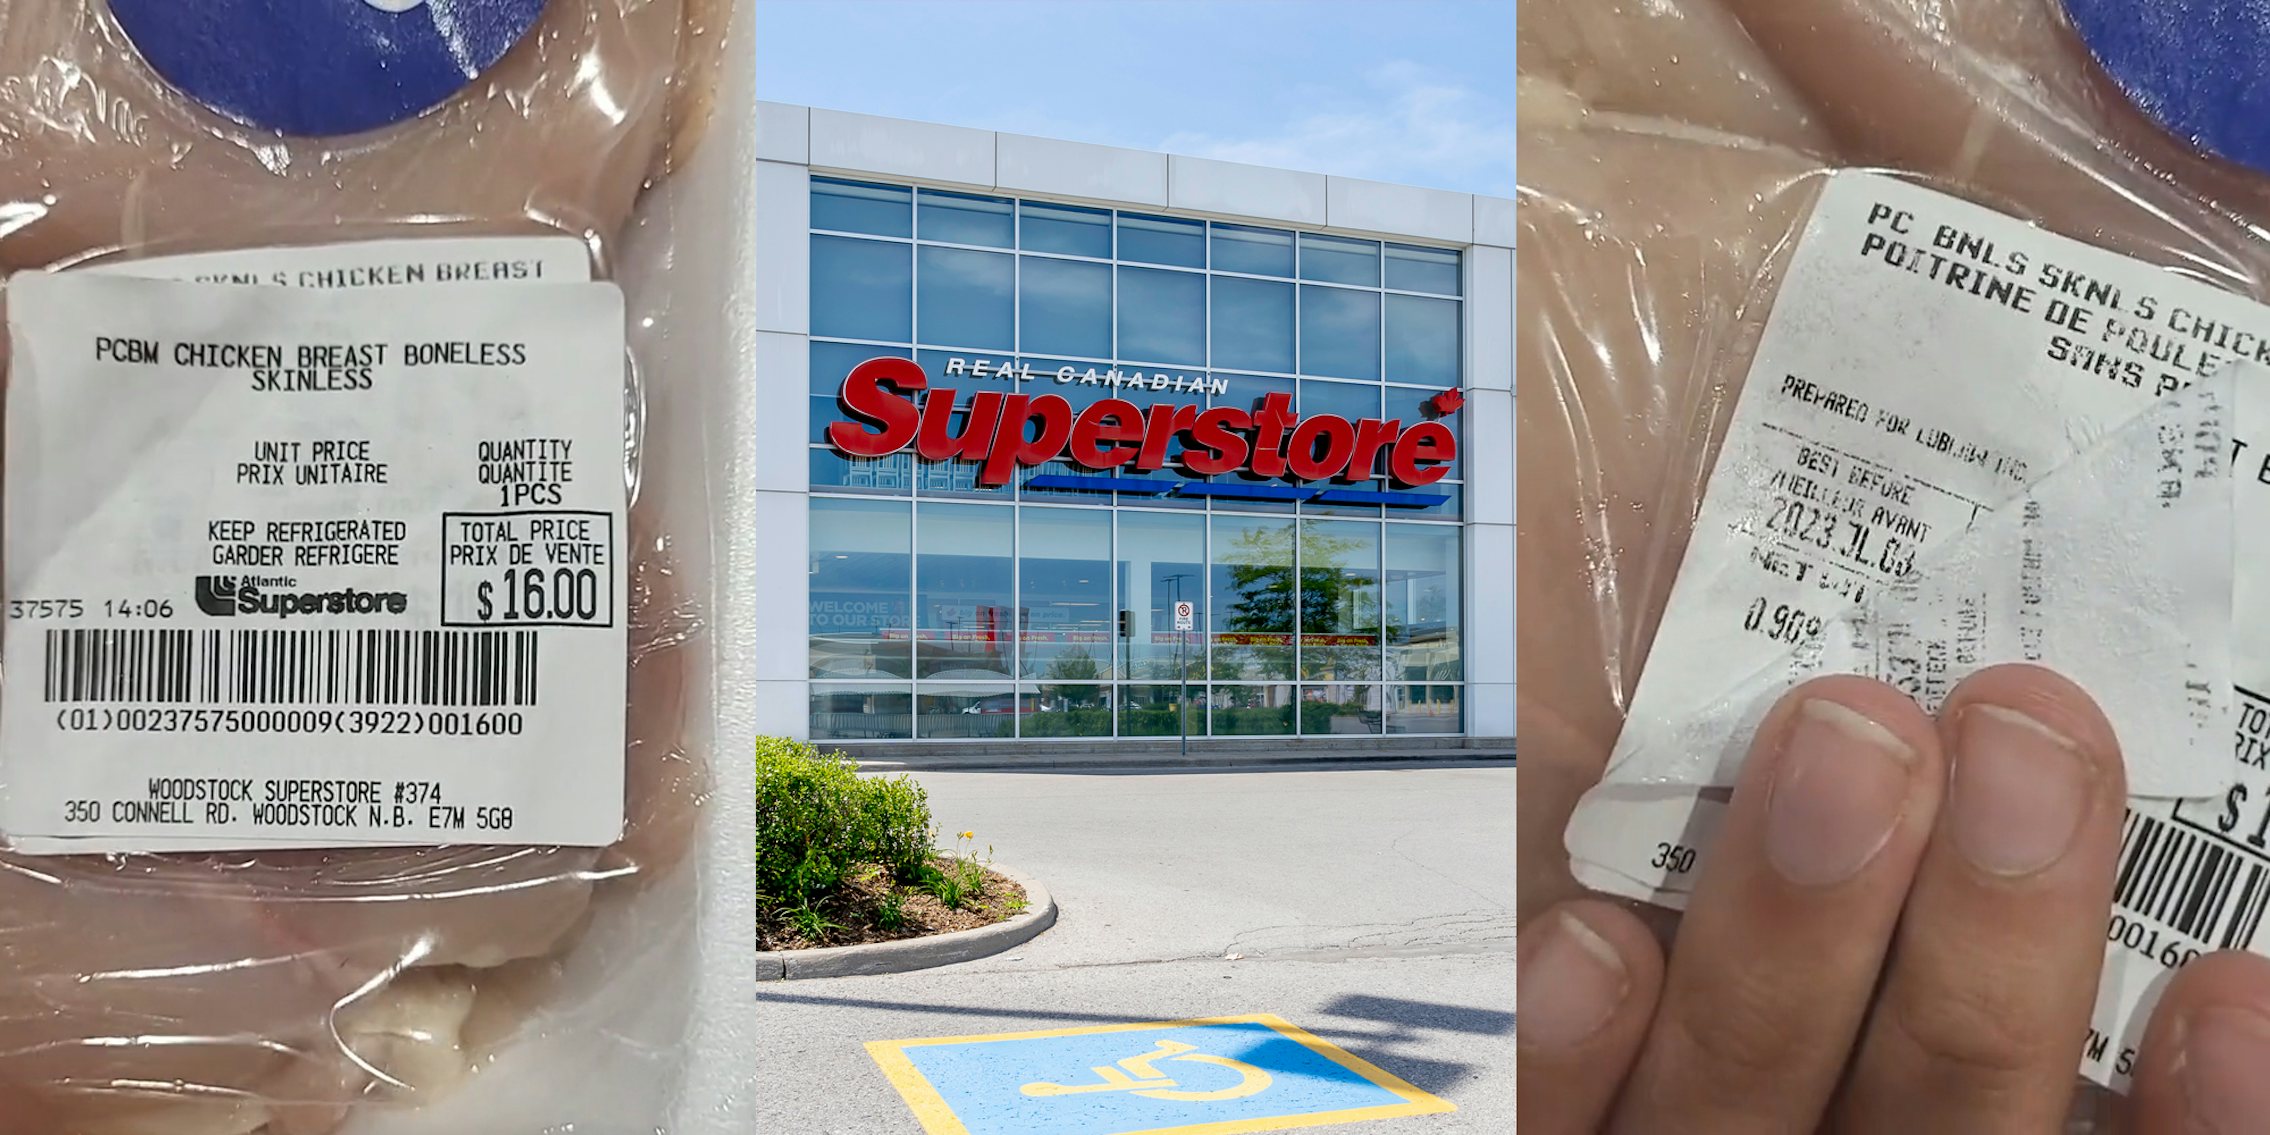 Superstore chicken sticker (l) Superstore building with sign (c) Superstore chicken sticker with fingers pulling back to reveal sticker underneath with expiration date (r)